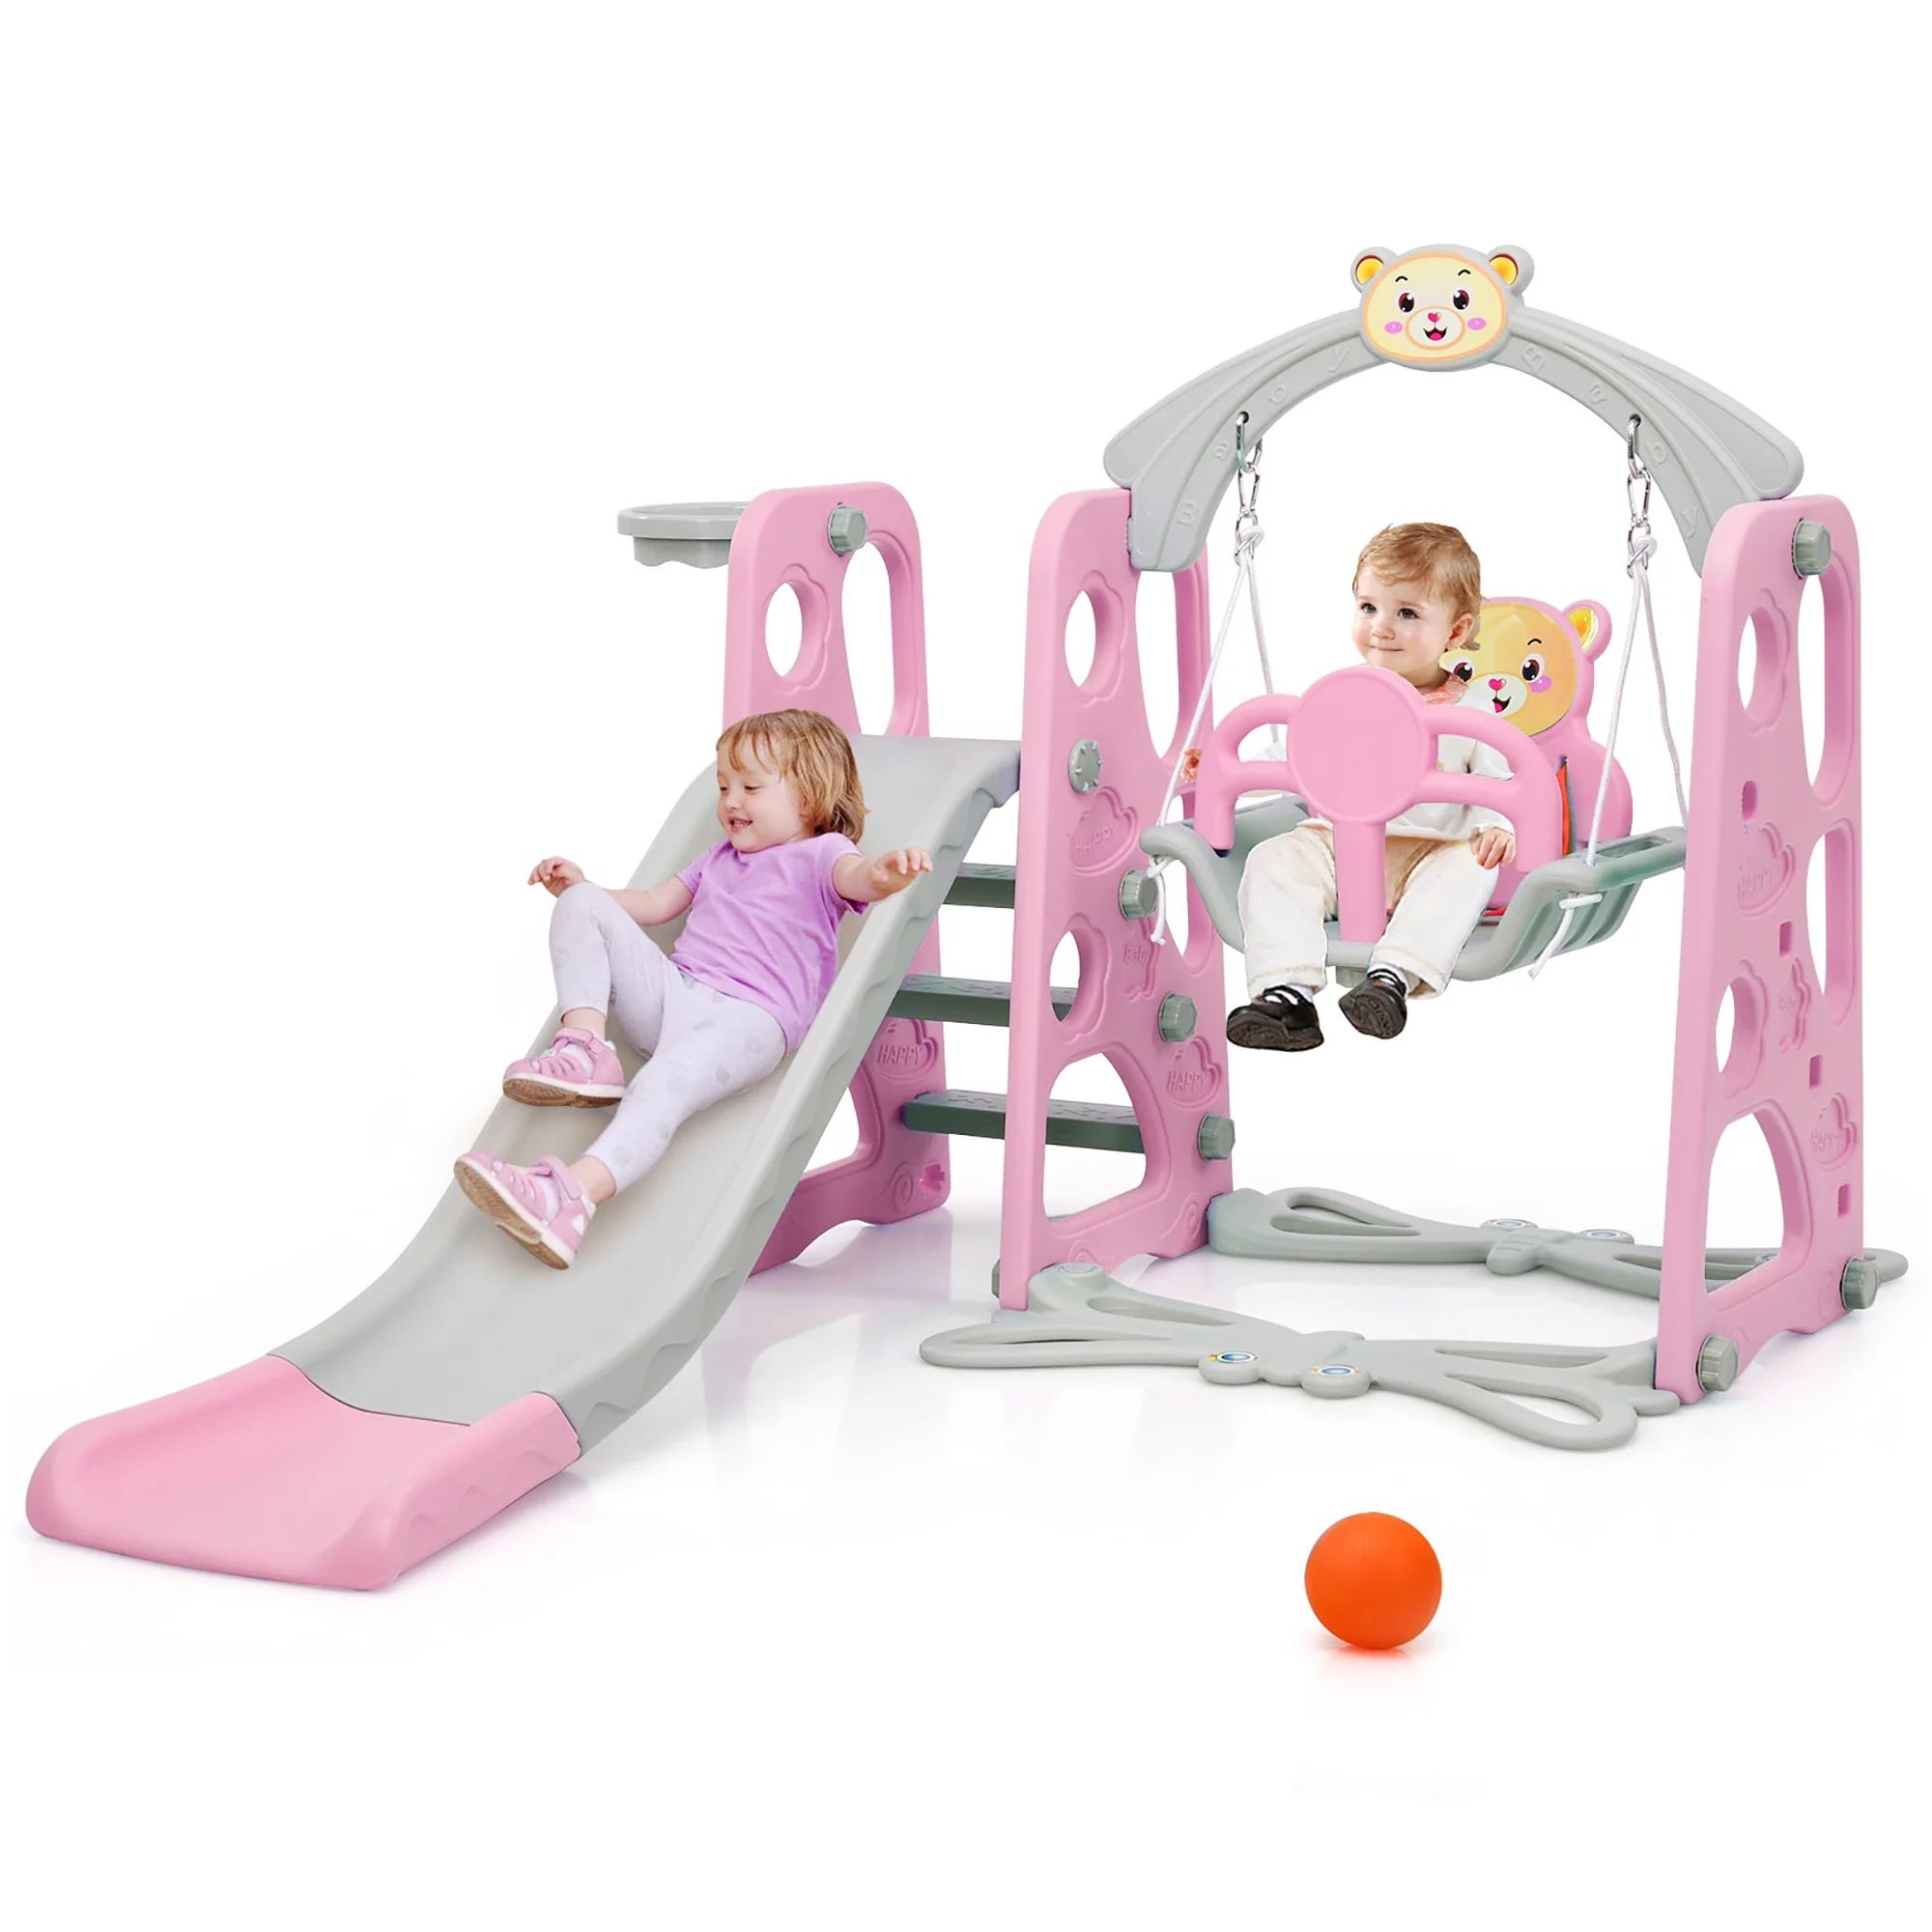 Costway 4-in-1 Toddler Climber and Swing Set w/ Basketball Hoop & Ball Pink | Walmart (US)